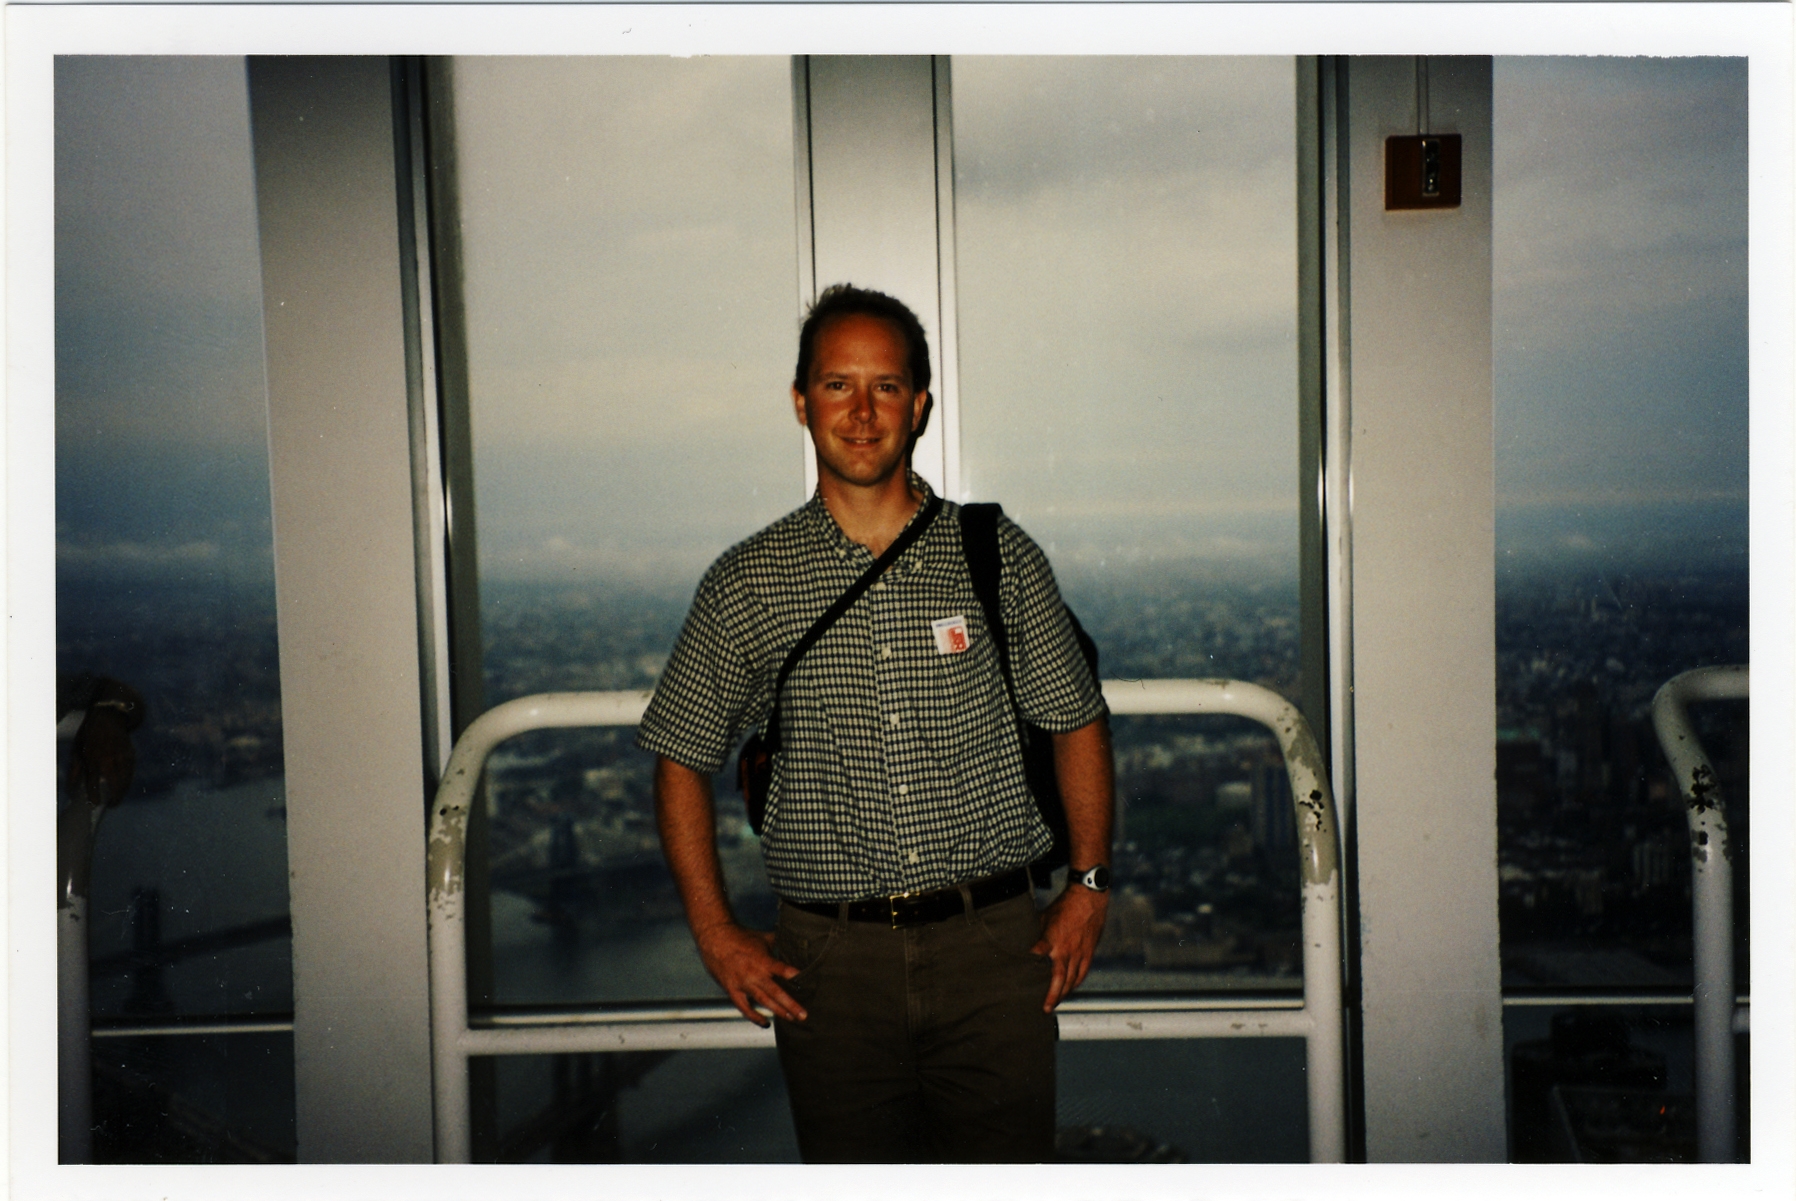 Evan Kuz poses for a photo at the South Tower observation deck on September 10, 2001.